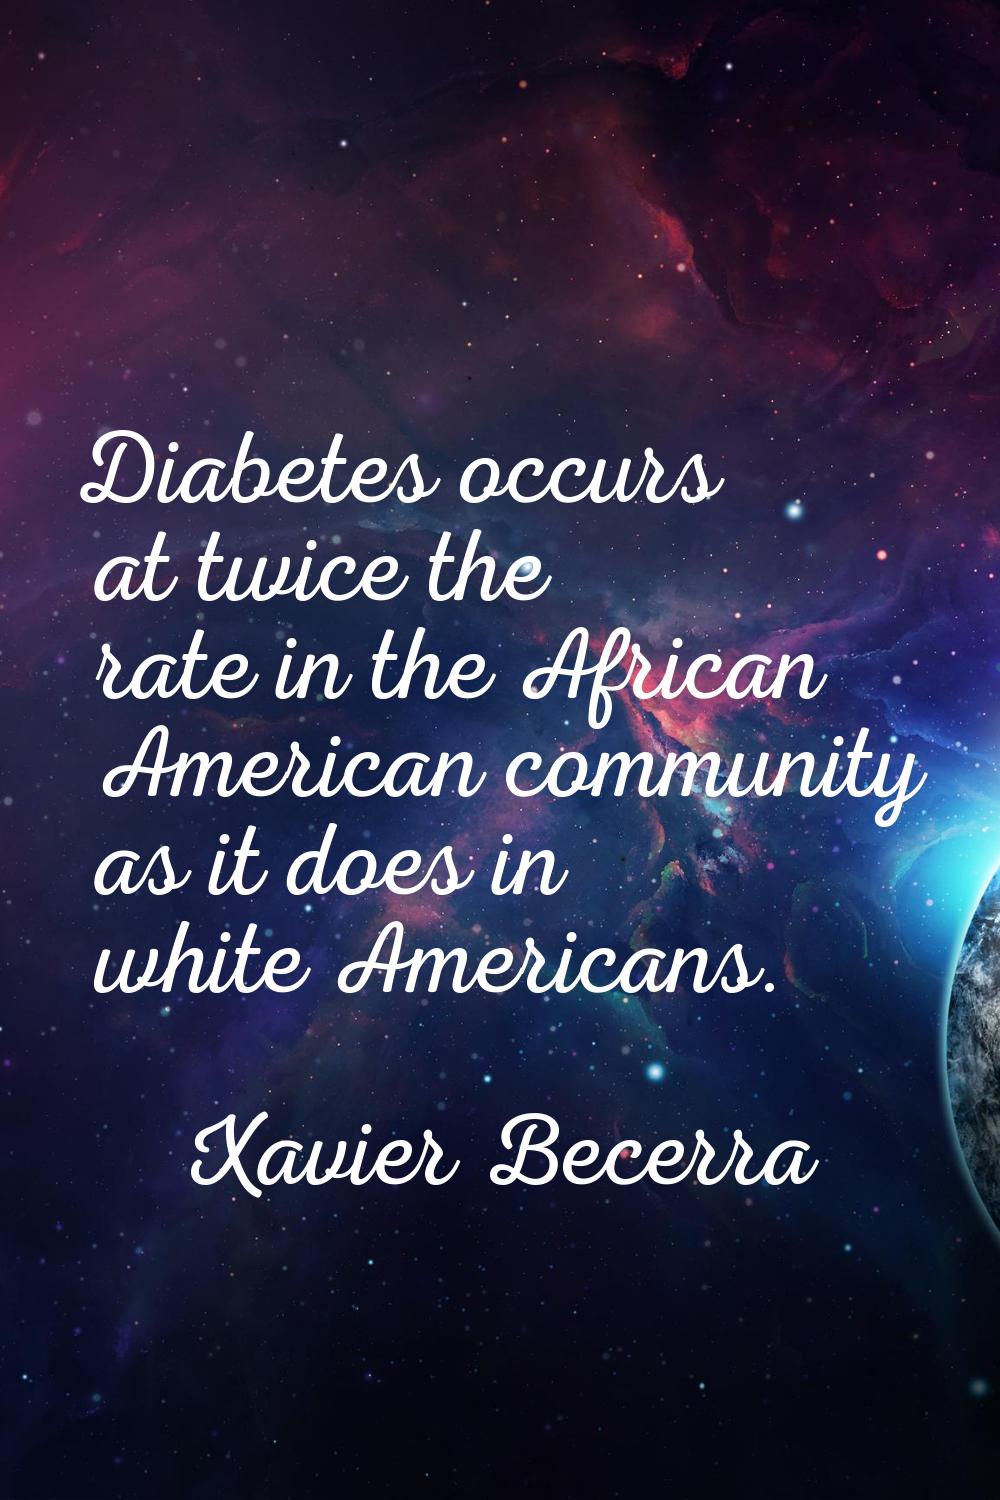 Diabetes occurs at twice the rate in the African American community as it does in white Americans.